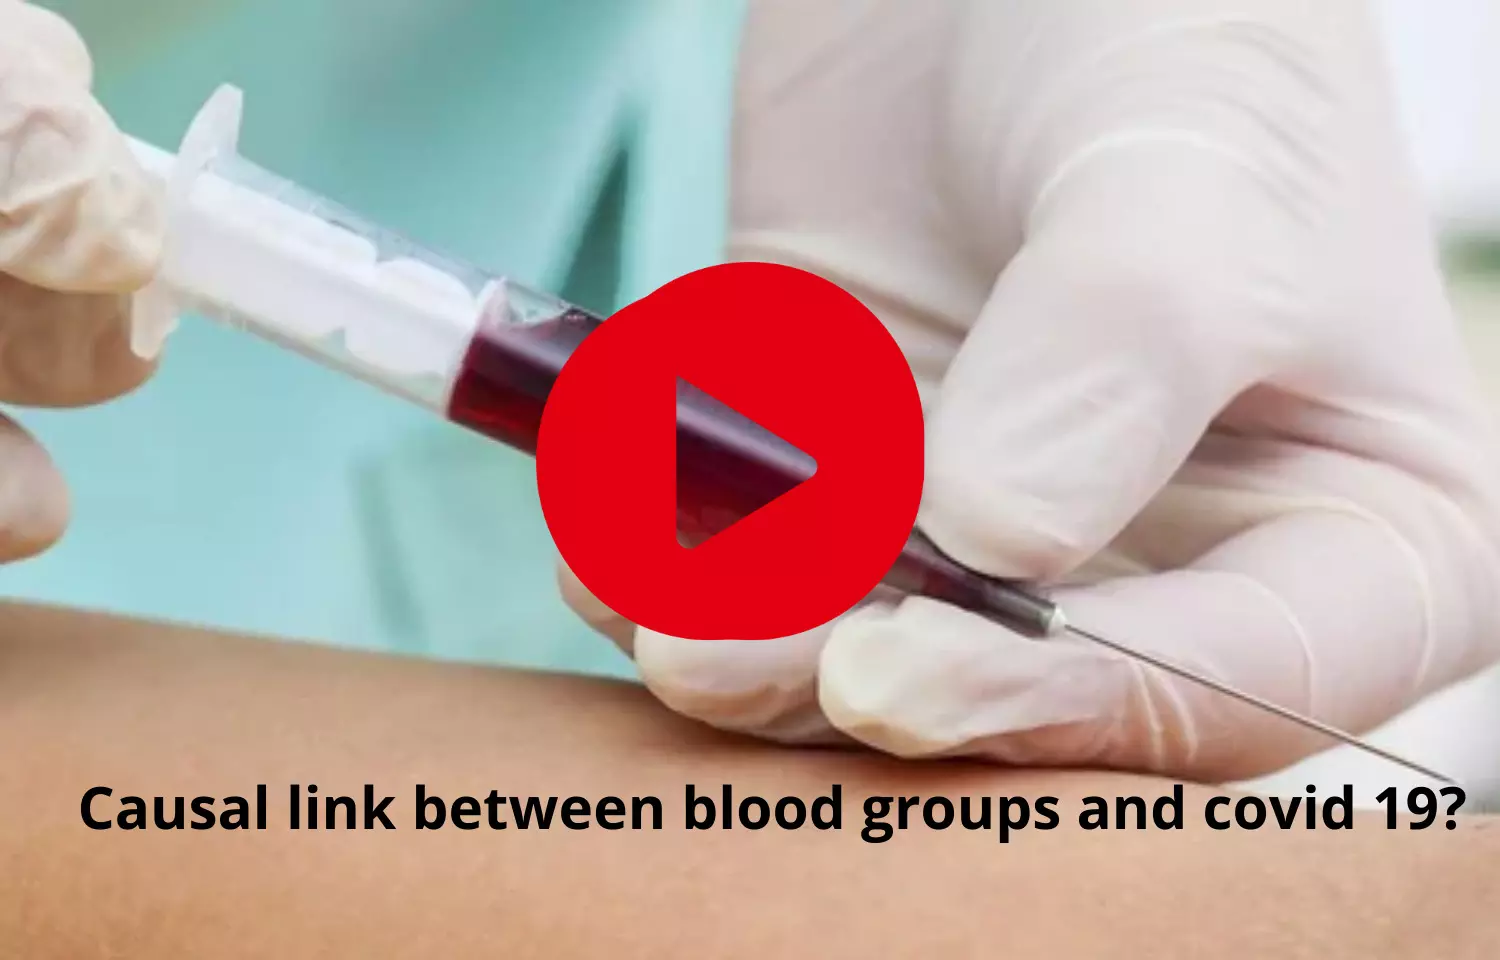 Causal link found between blood groups and covid 19?